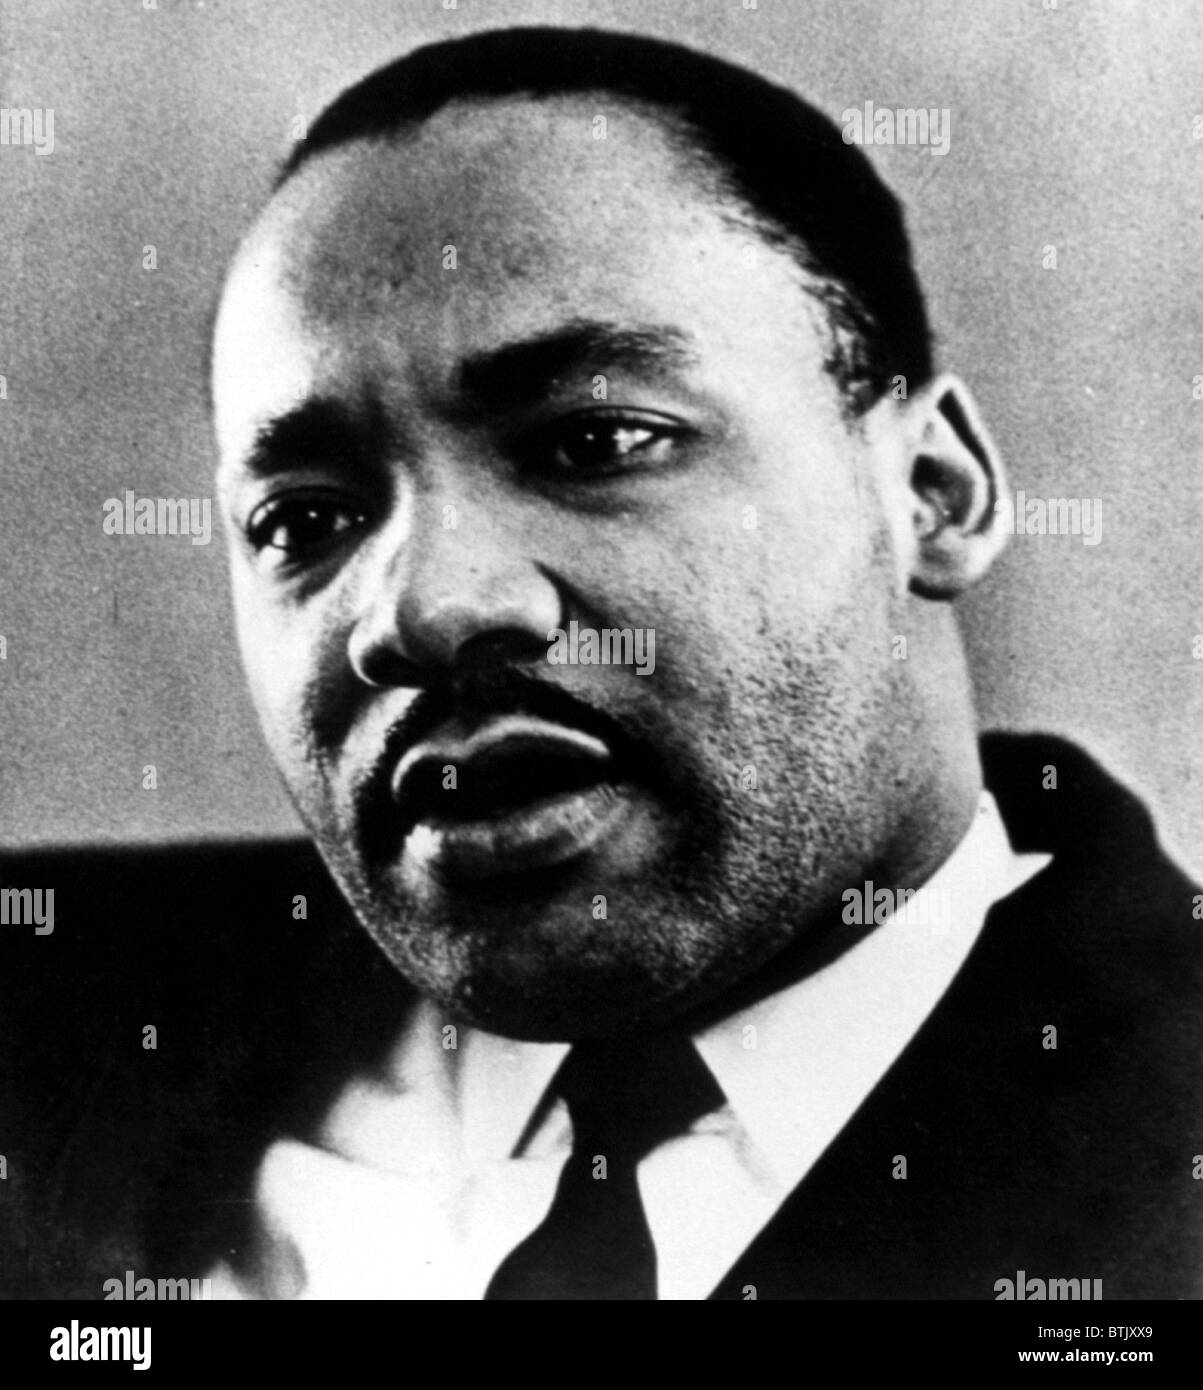 MARTIN LUTHER KING, JR. Stock Photo